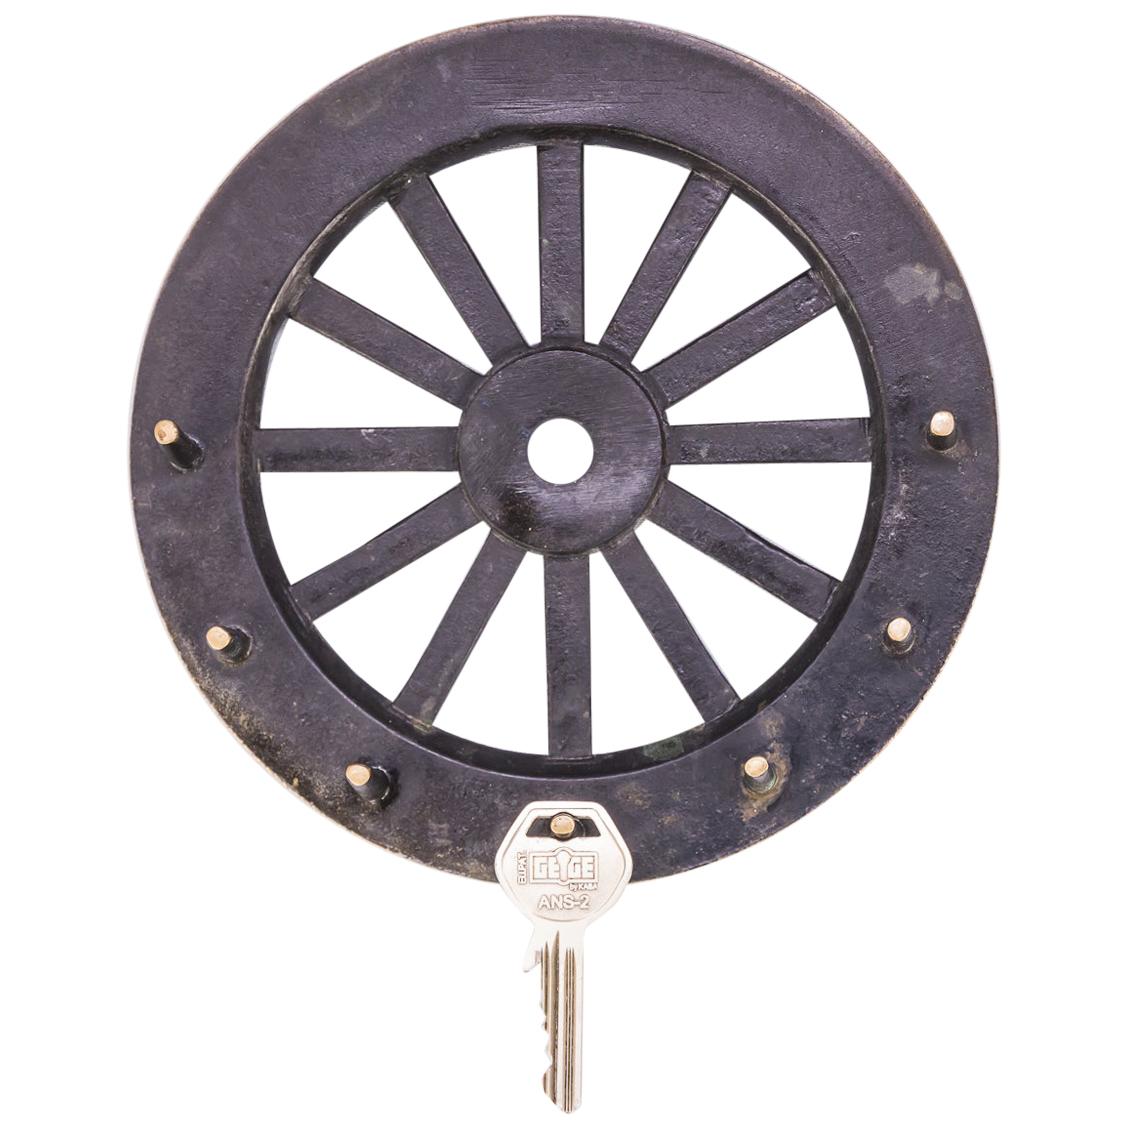 Key Holder in a Style of a Wheel by Walter Bosse, circa 1950s